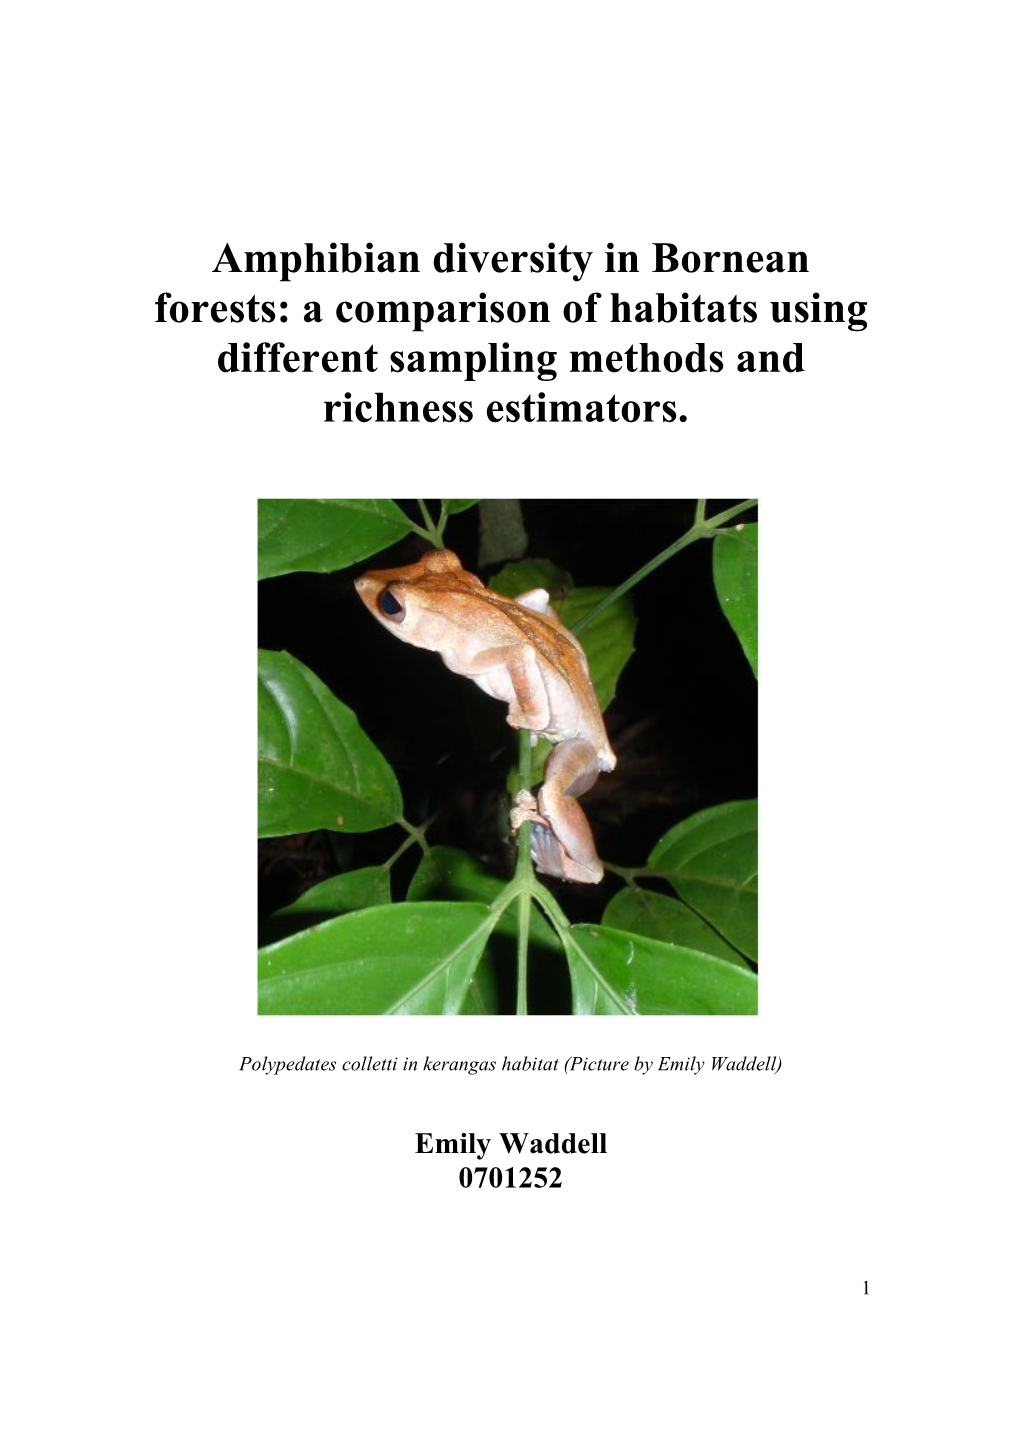 Amphibian Diversity in Bornean Forests: a Comparison of Habitats Using Different Sampling Methods and Richness Estimators